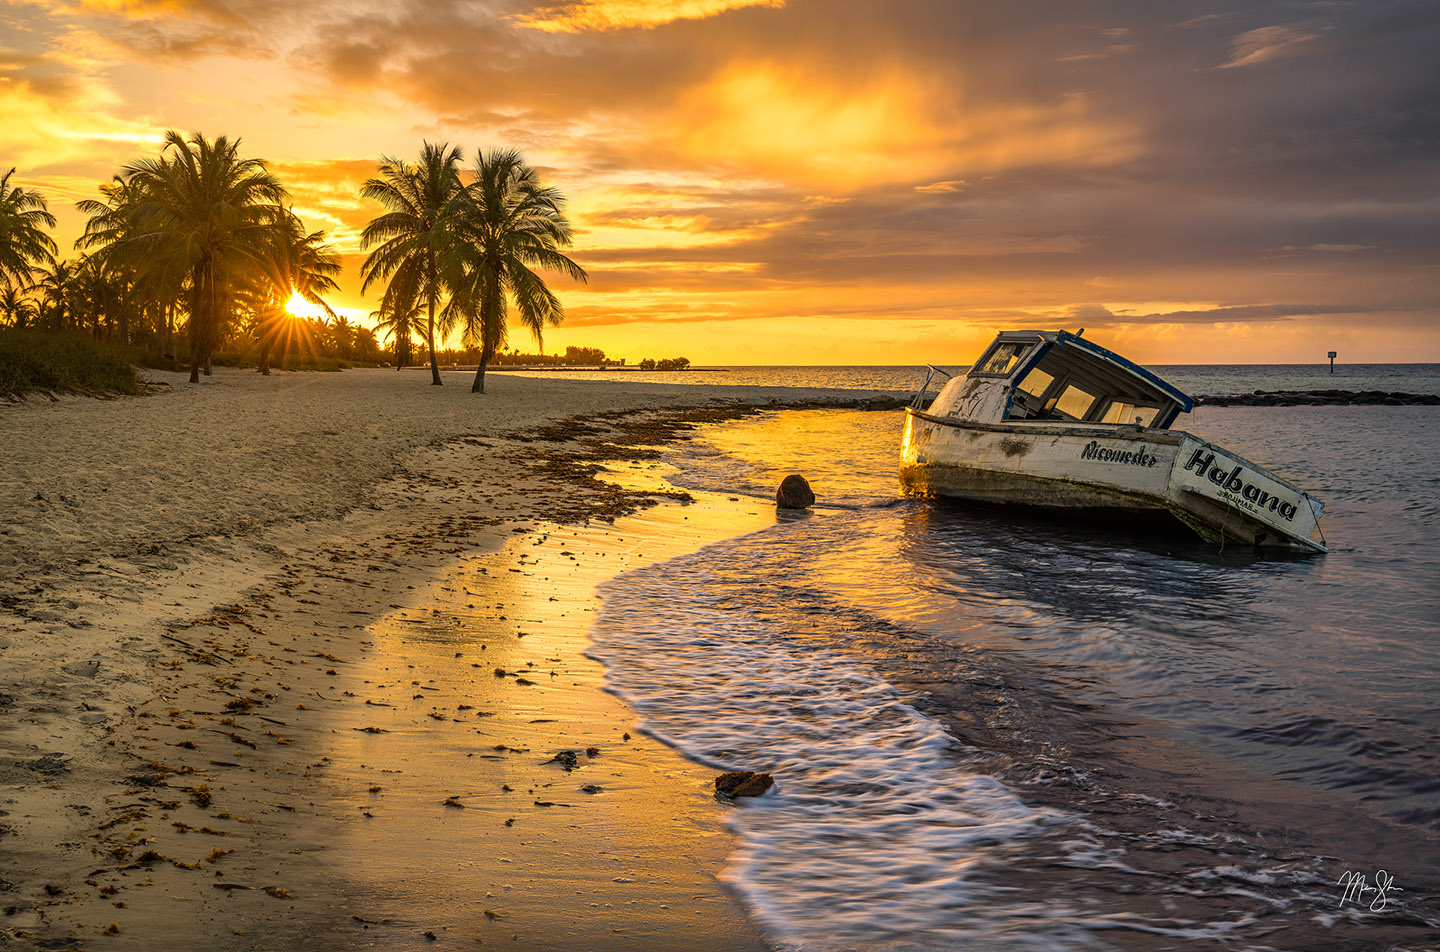 A recently abandonded ship from Cuba at Smathers Beach, Key West